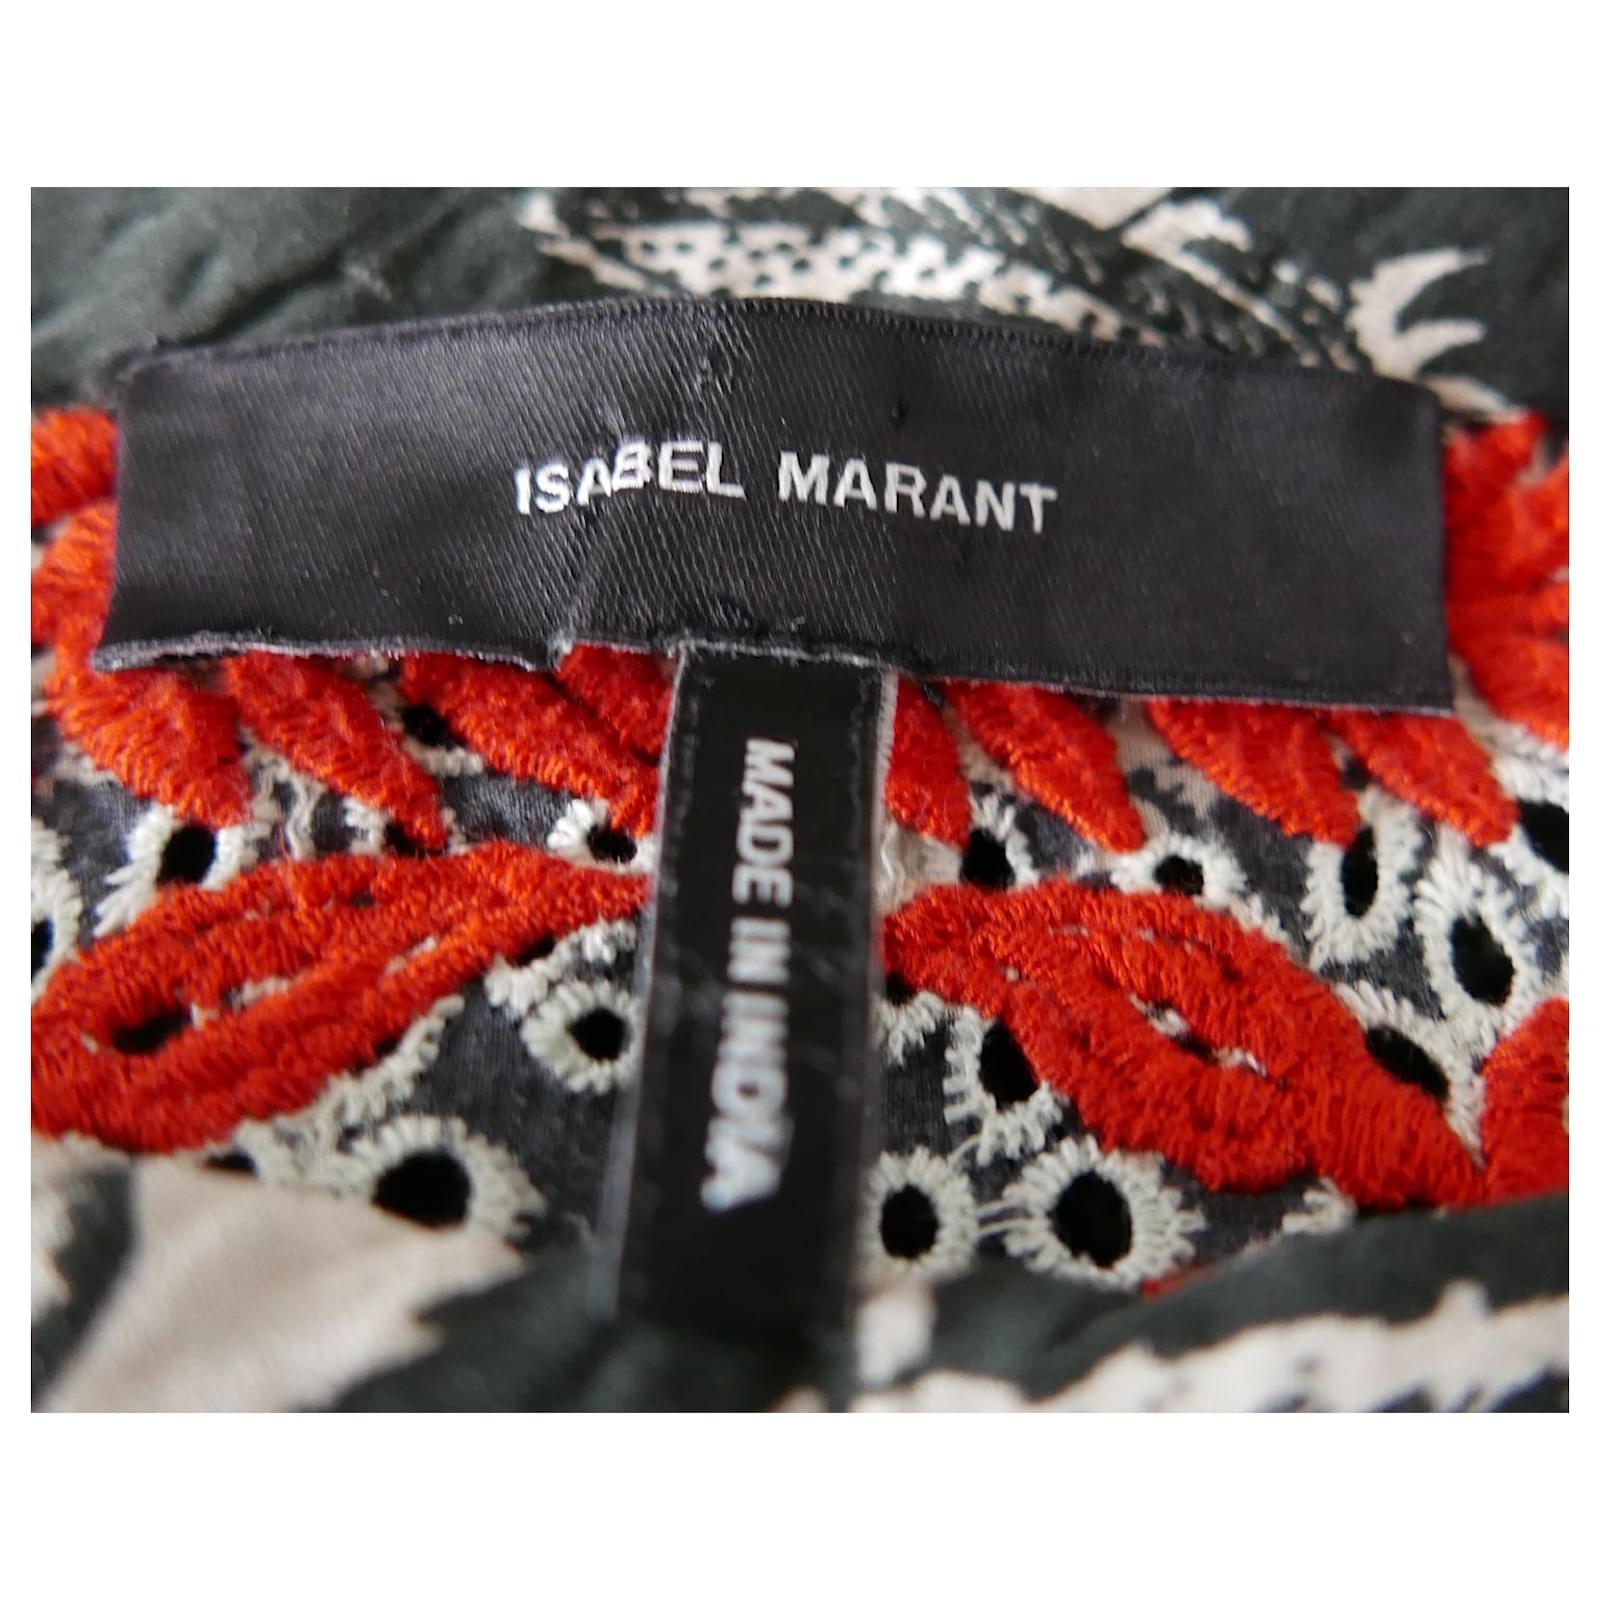 Isabel Marant SS13 Embroidered Top For Sale 2